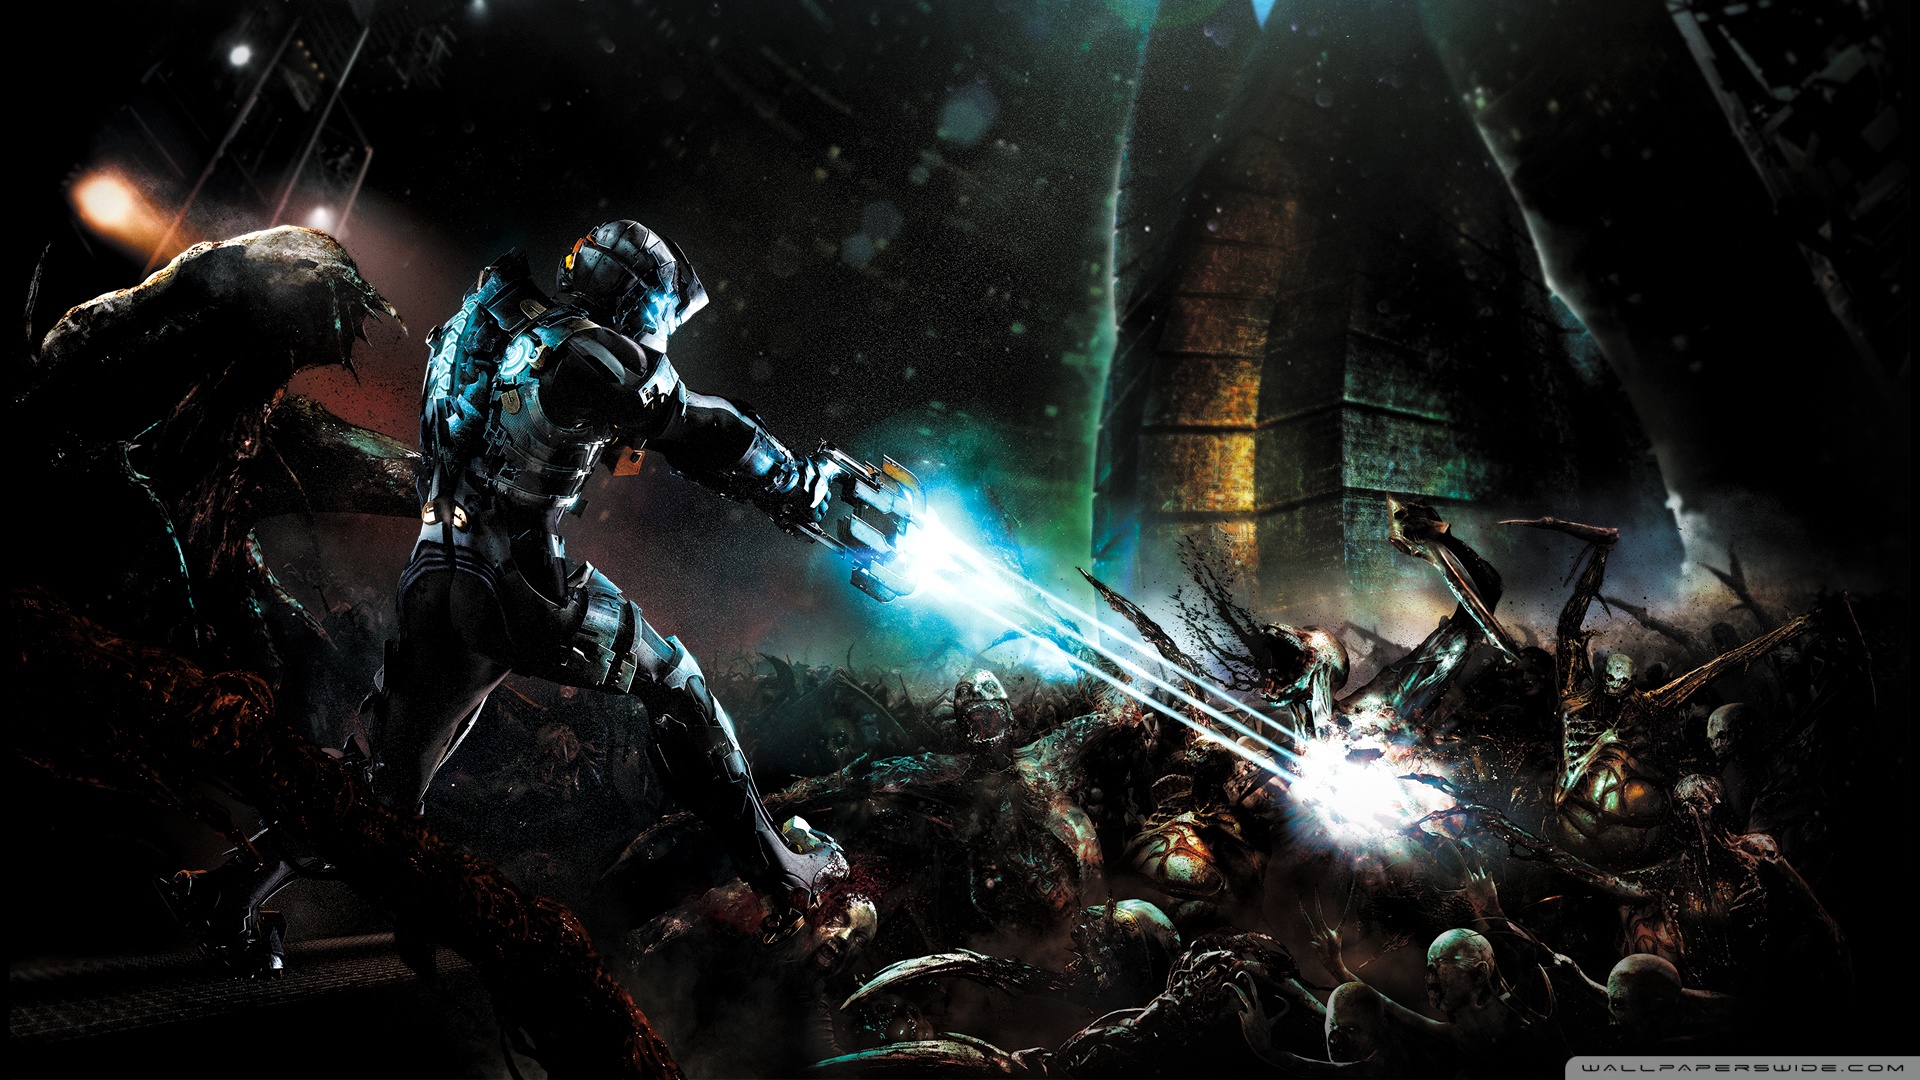 Dead Space HD Wallpapers and Backgrounds